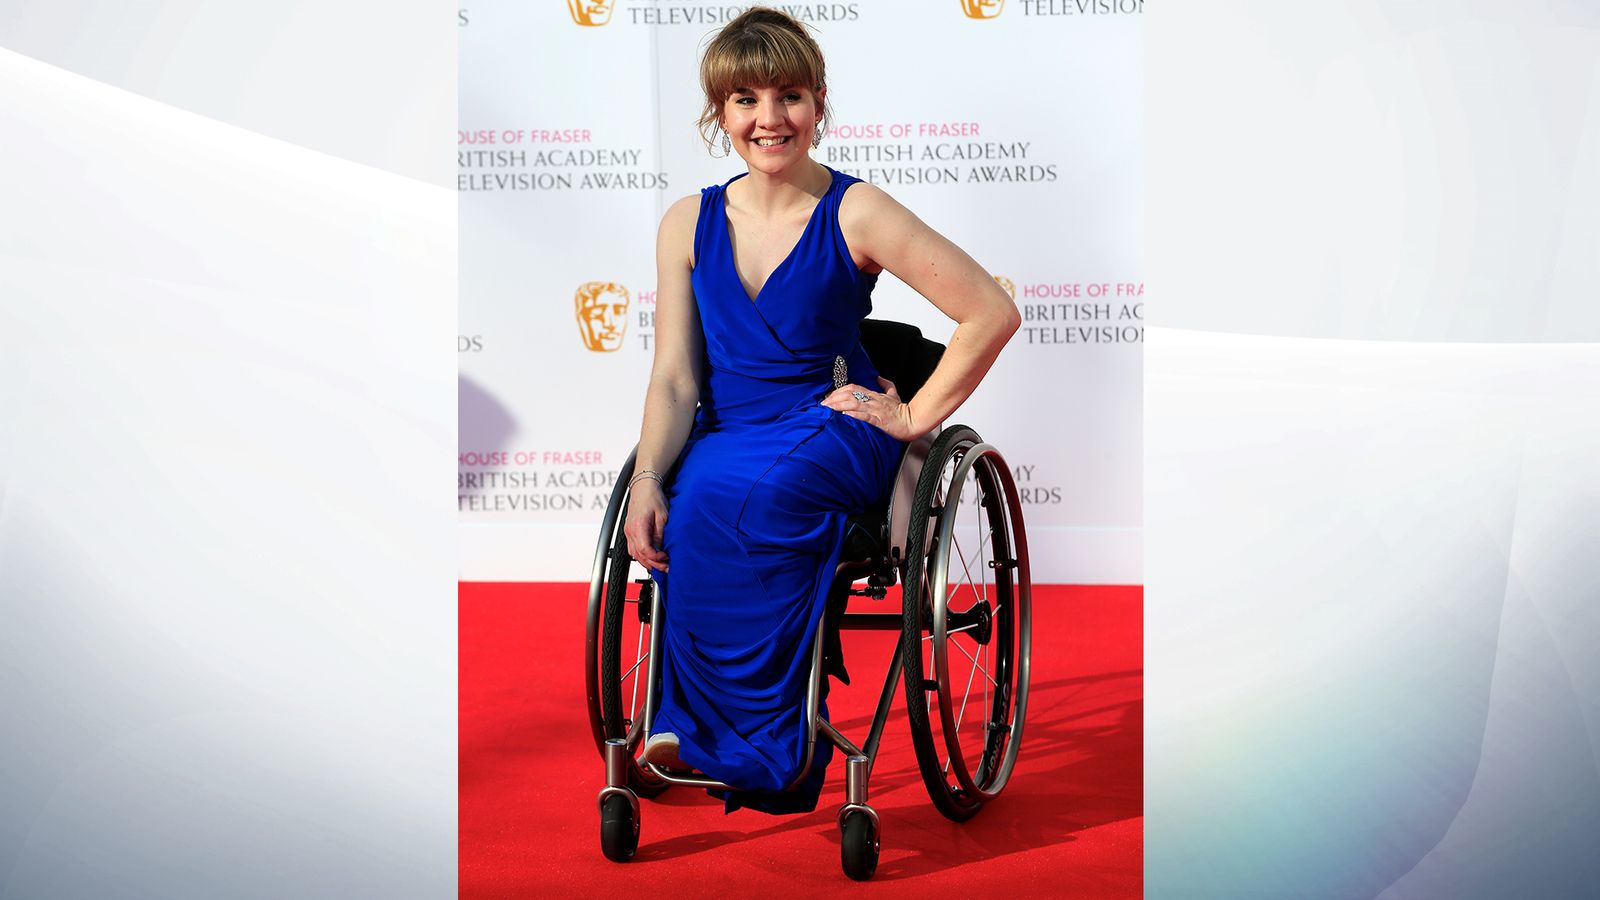 Actress Ruth Madeley says taxi driver took away her wheelchair